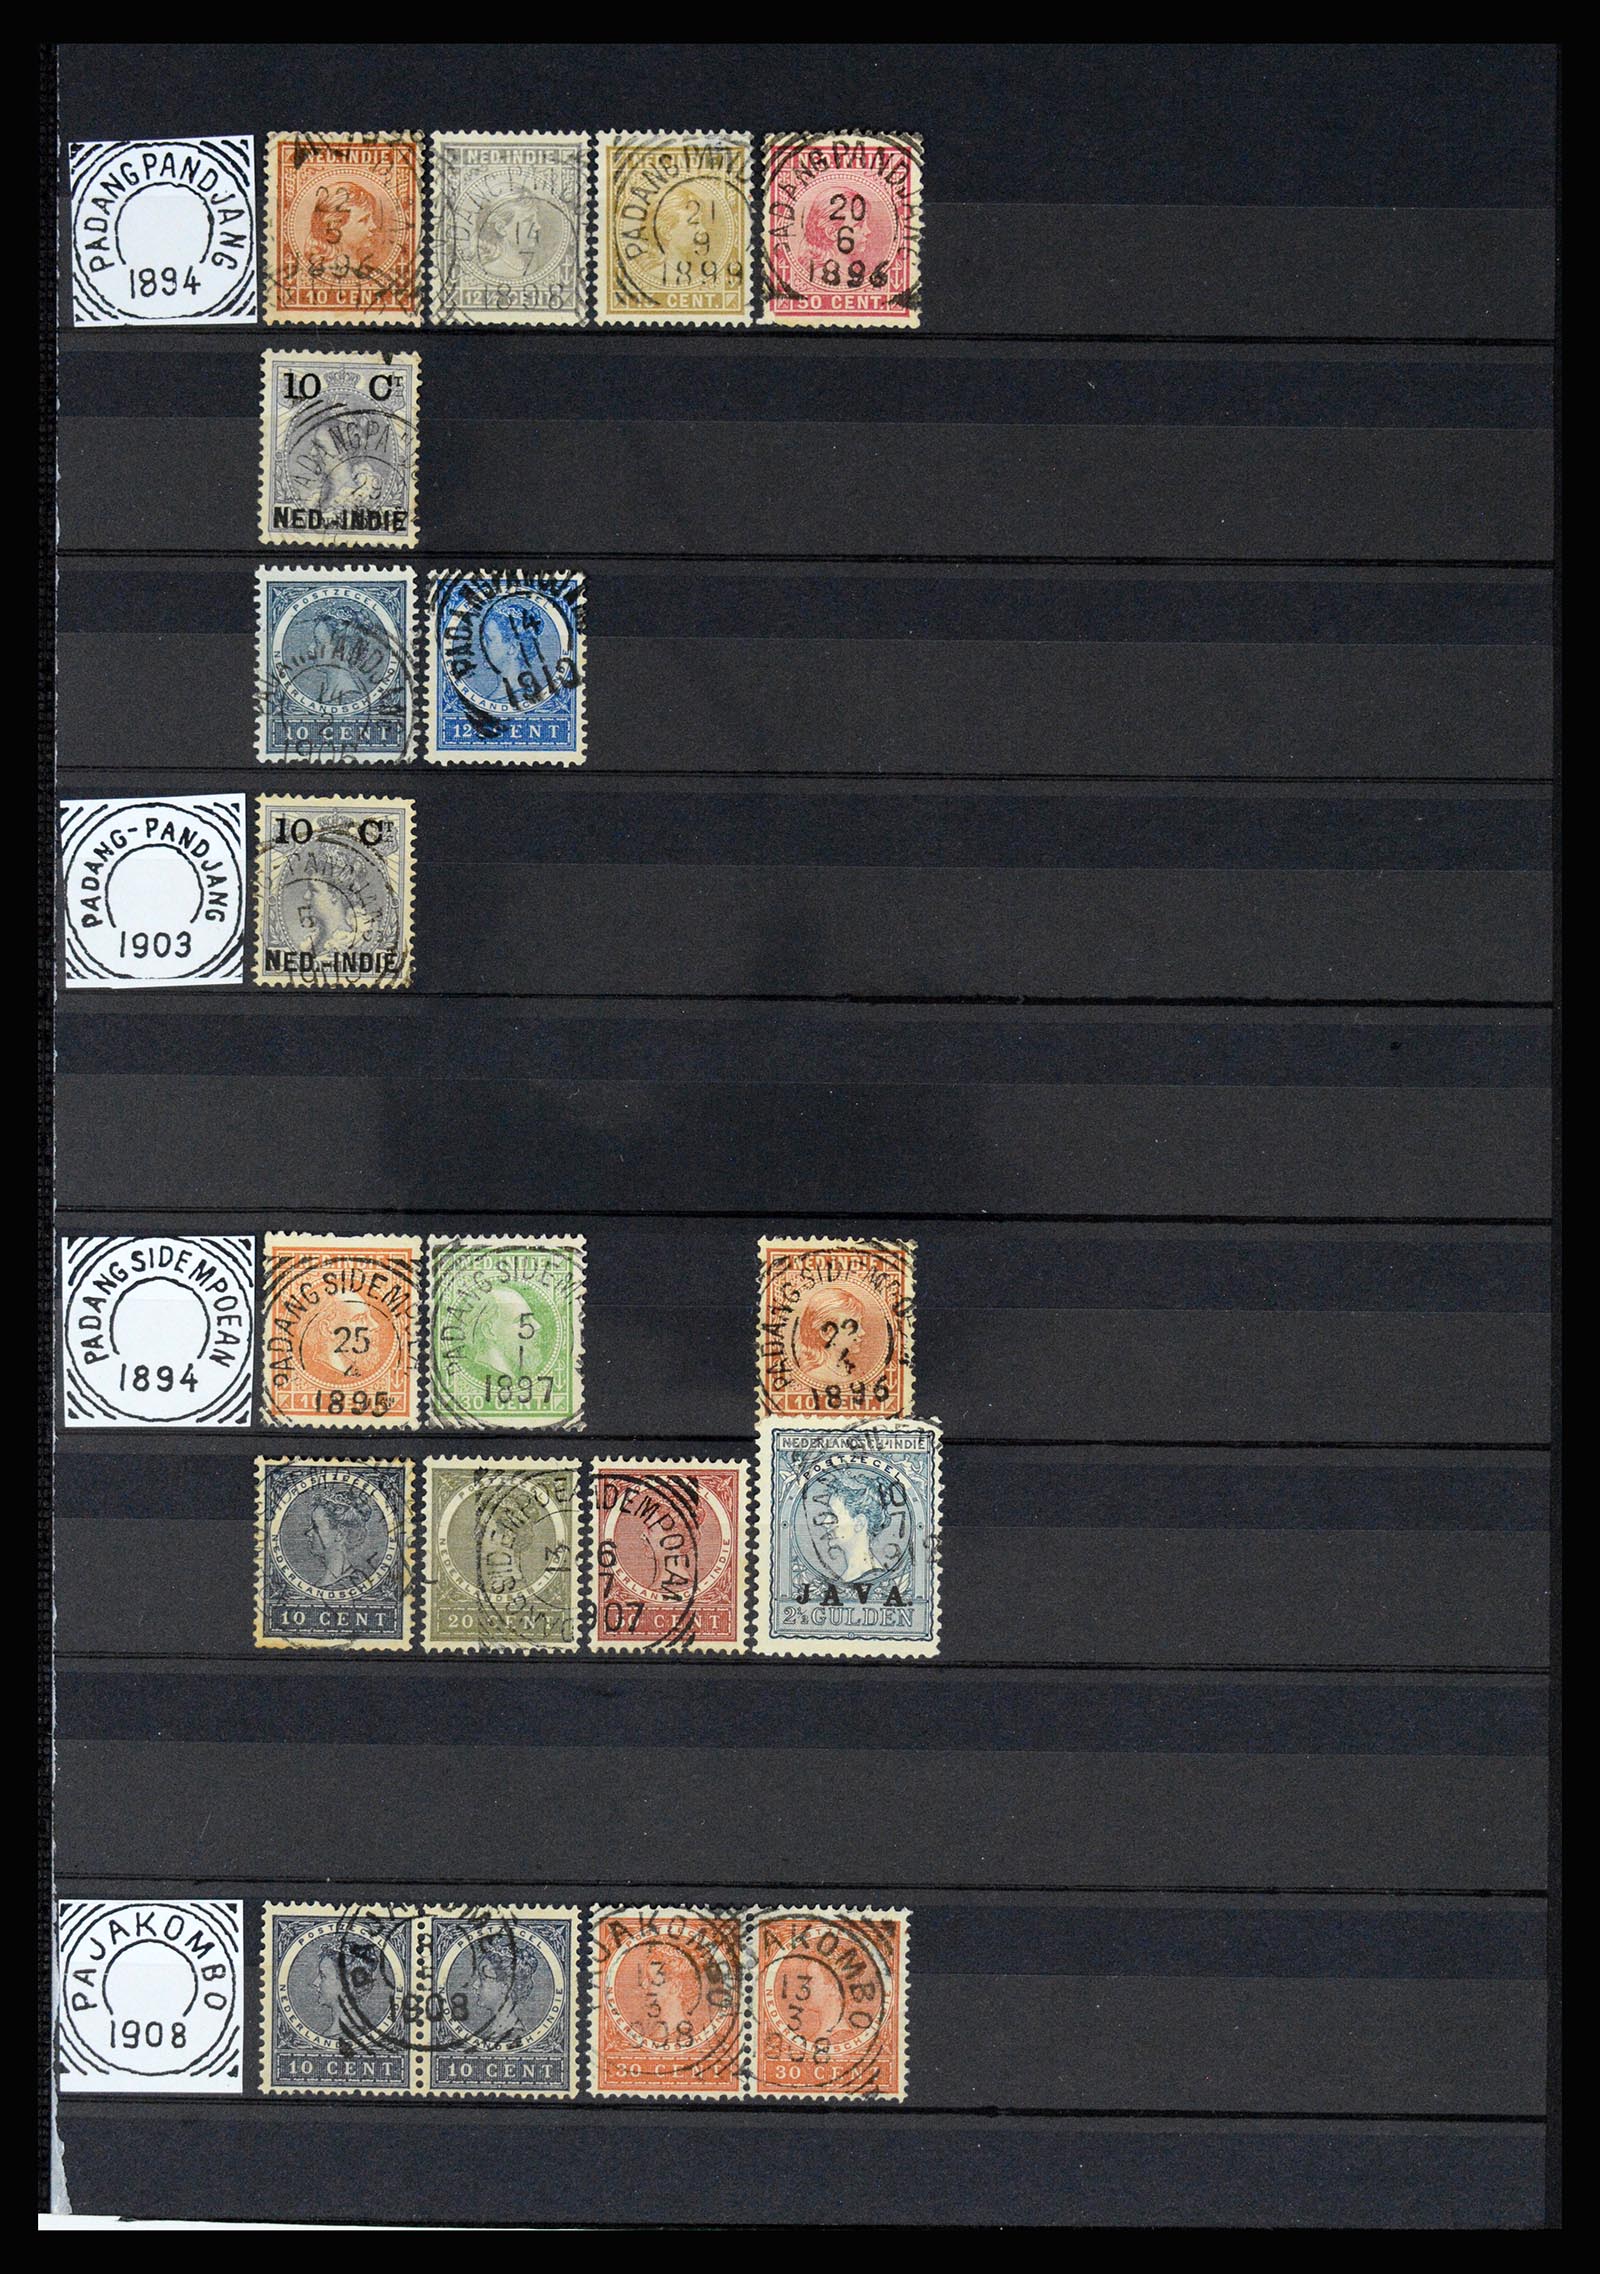 36839 034 - Stamp collection 36839 Dutch east Indies square cancels.